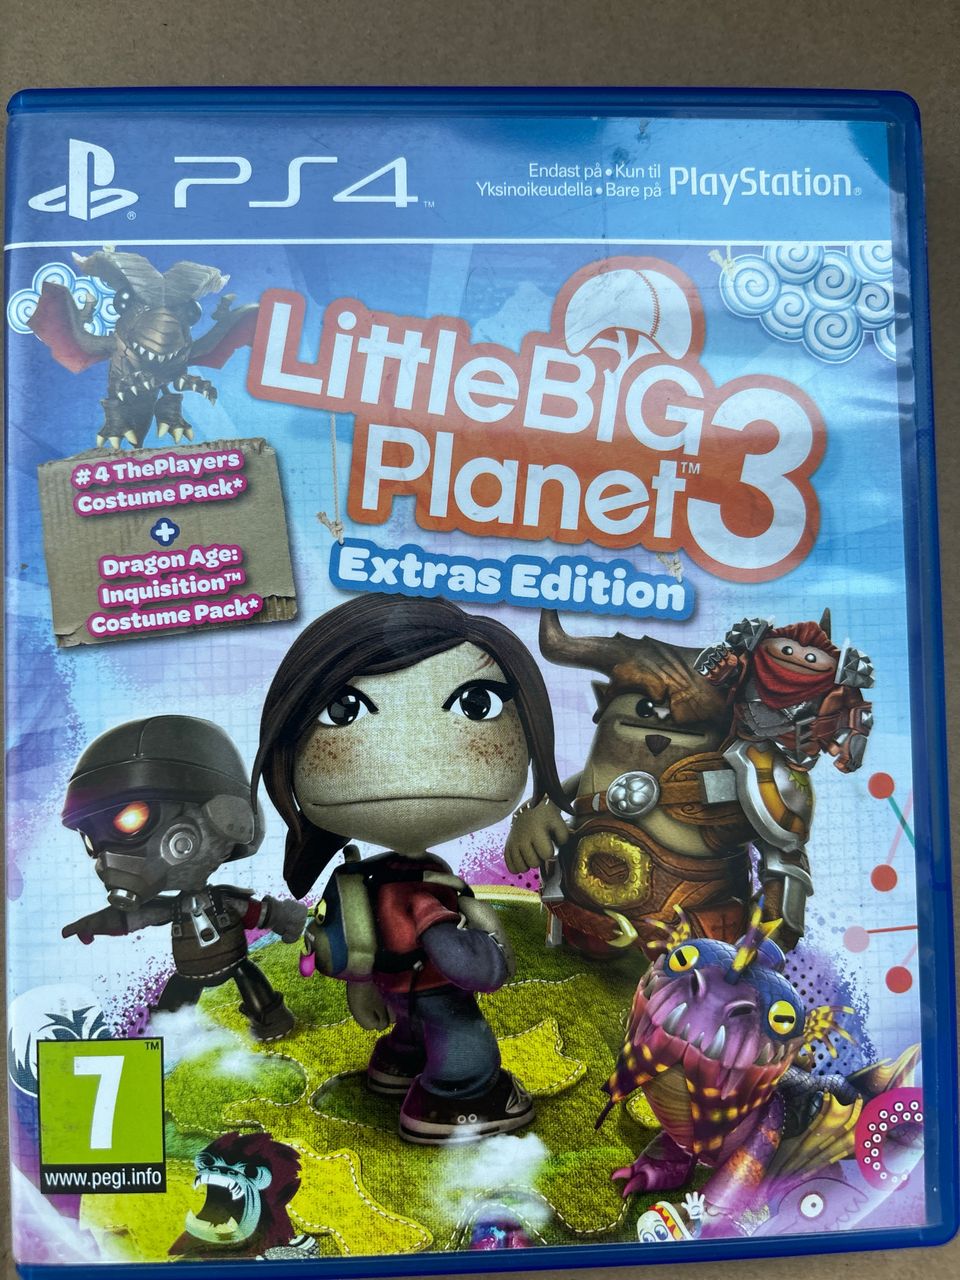 Little Big Planet 3 Extras Edition